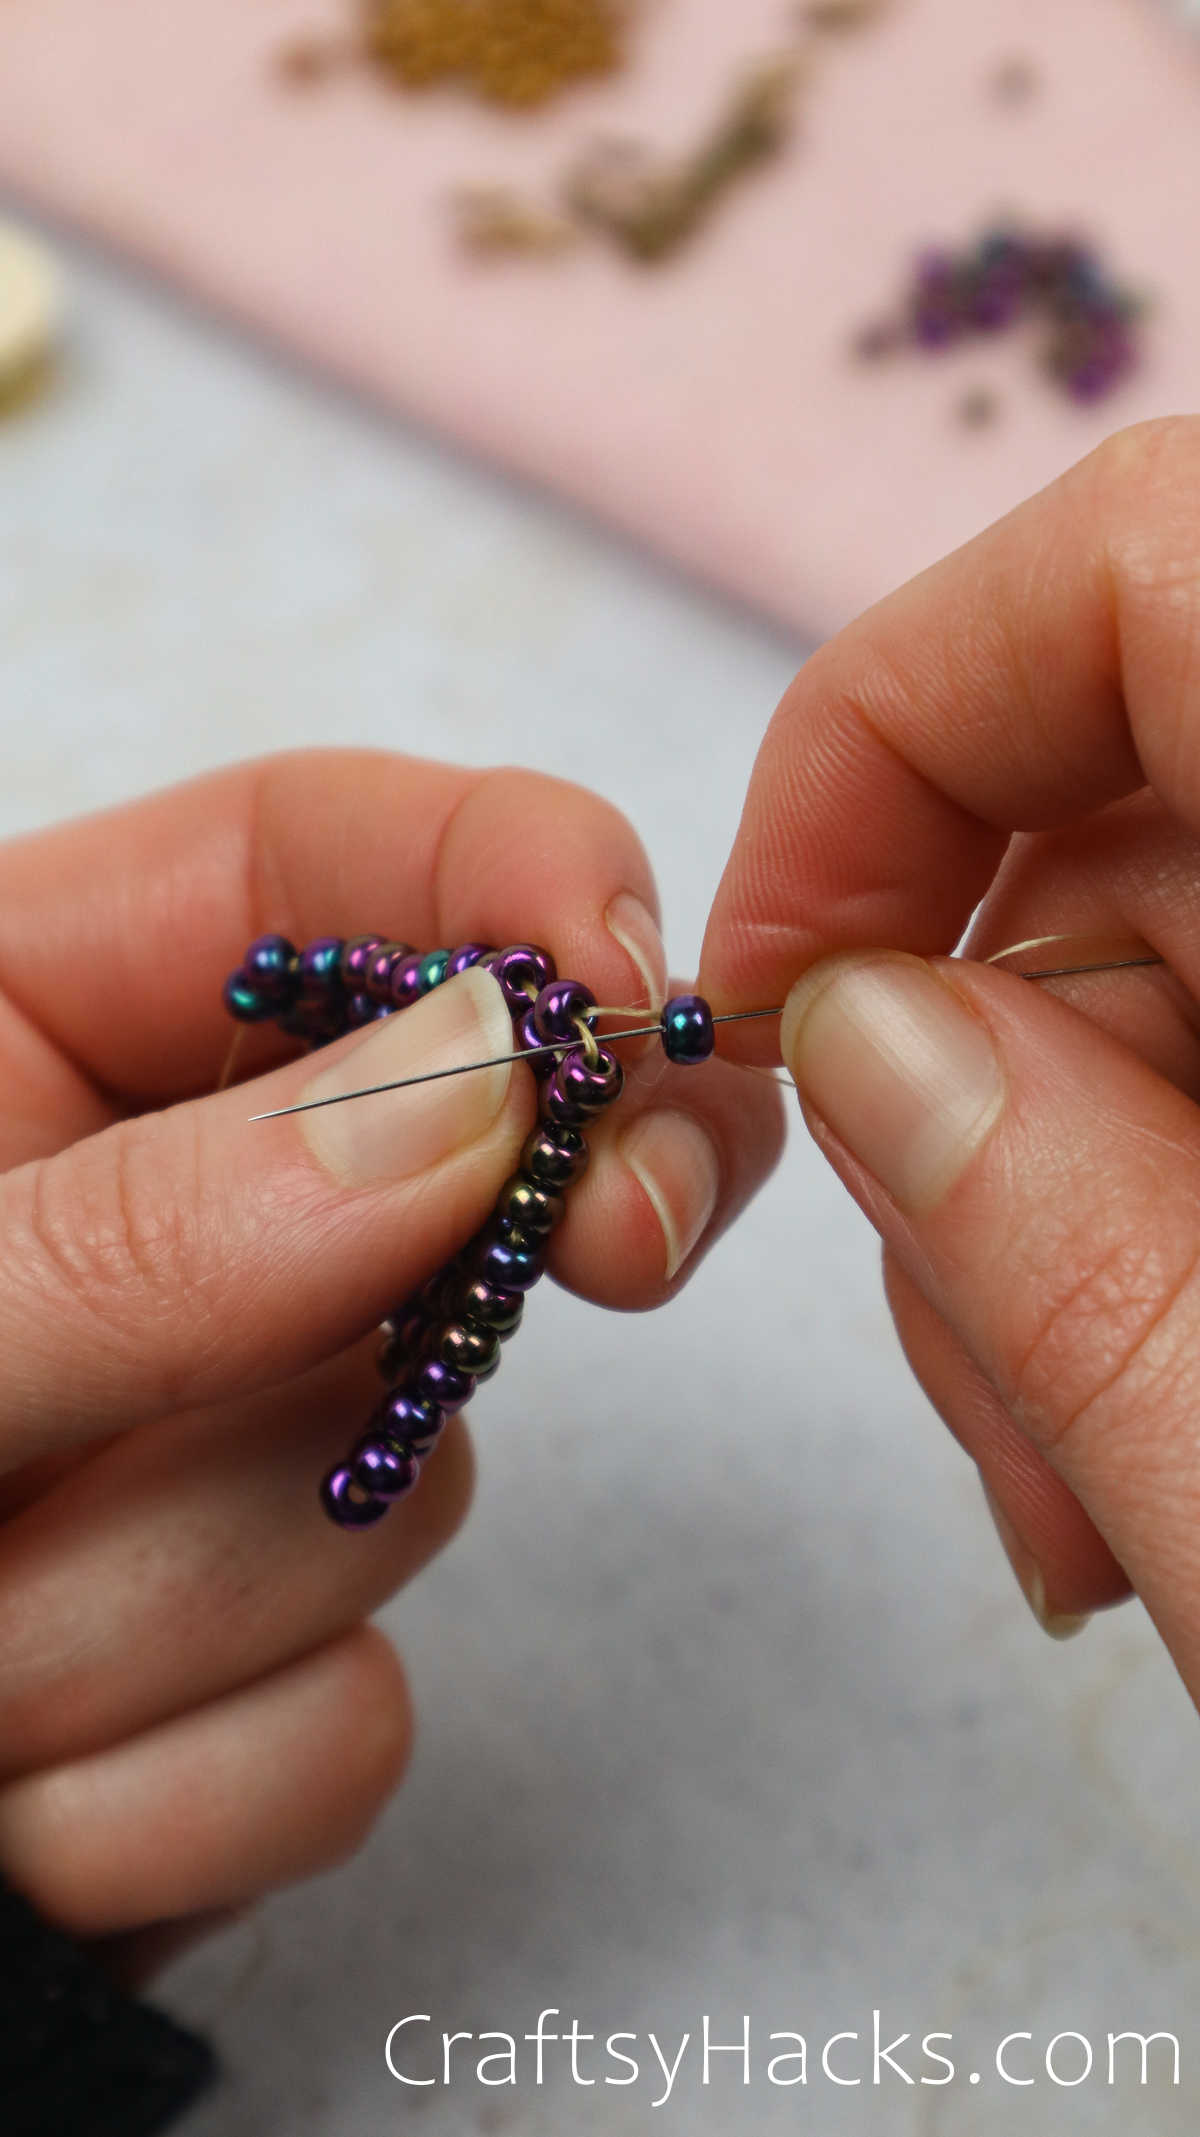 finish the triangle shape with a bead on top